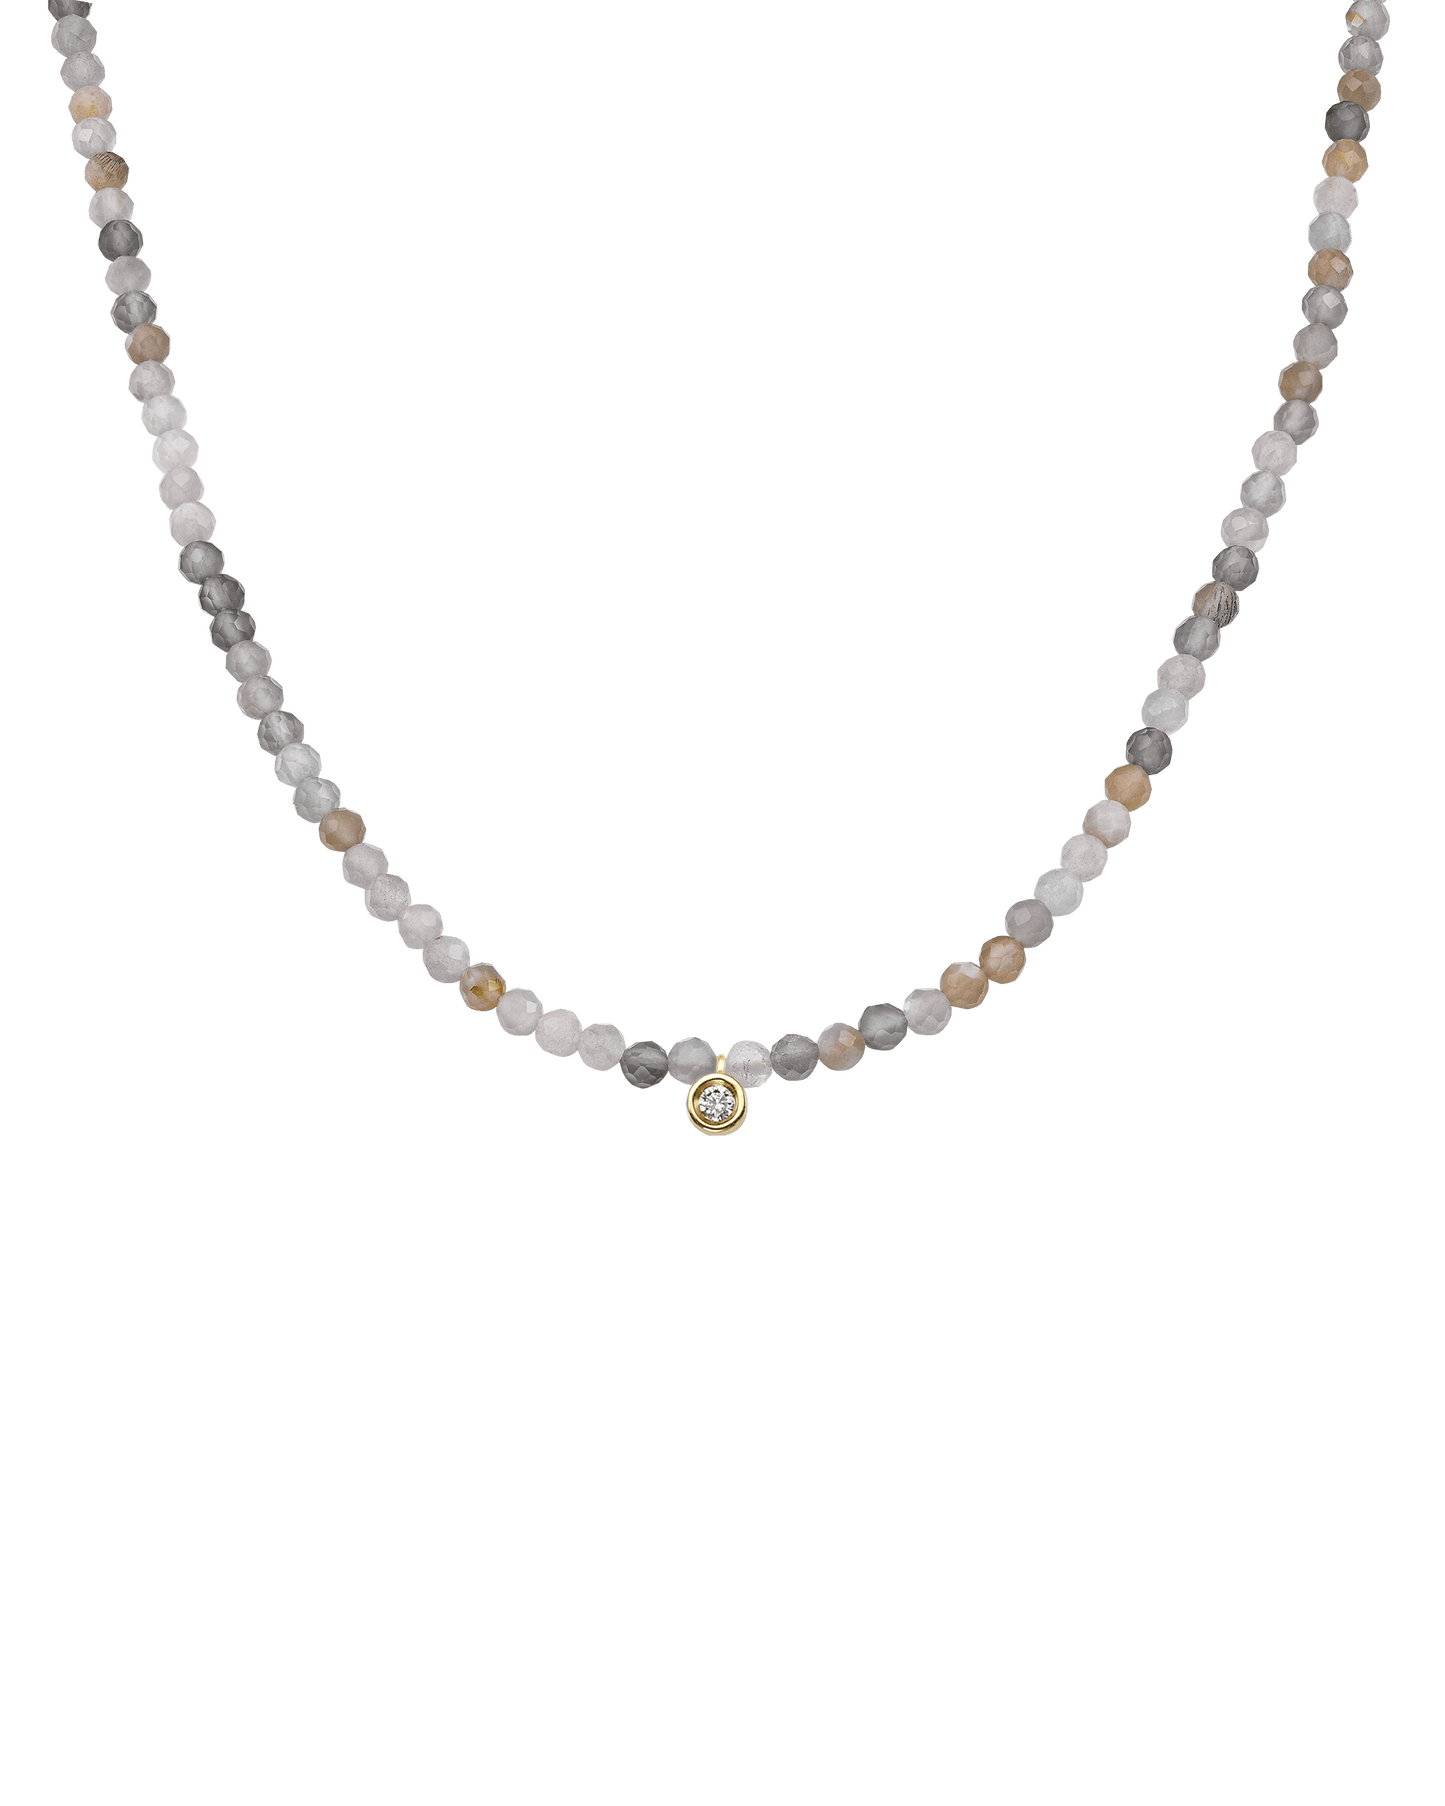 The Gemstone & Diamond Necklace - 14K Yellow Gold Necklaces 14K Solid Gold Natural Moonstone Small: 0.03ct 14"